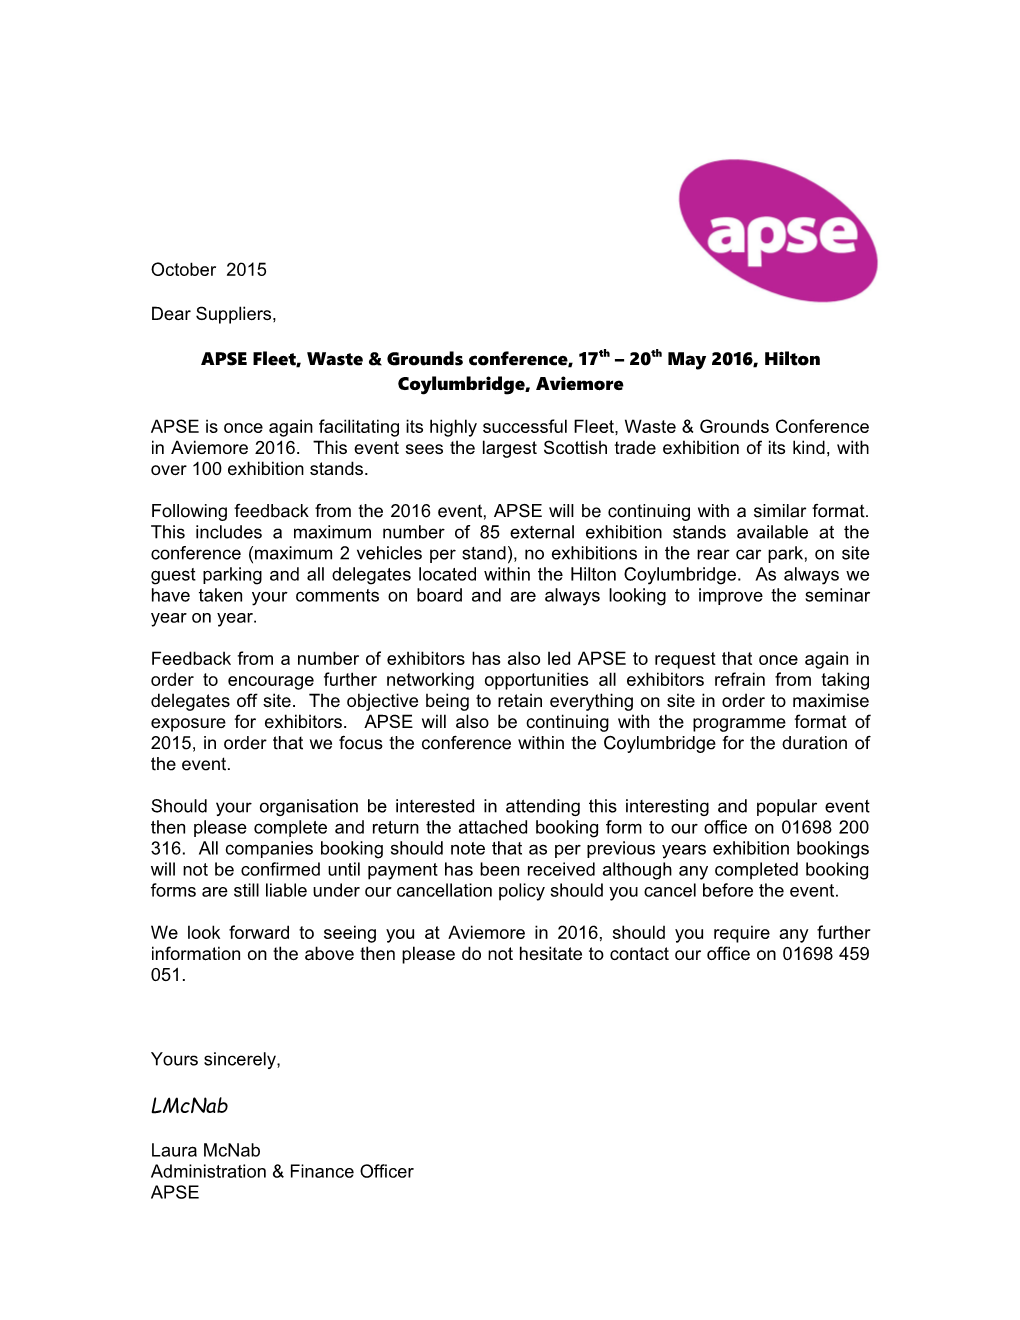 APSE Fleet, Waste & Grounds Conference, 17Th 20Th May 2016, Hilton Coylumbridge, Aviemore